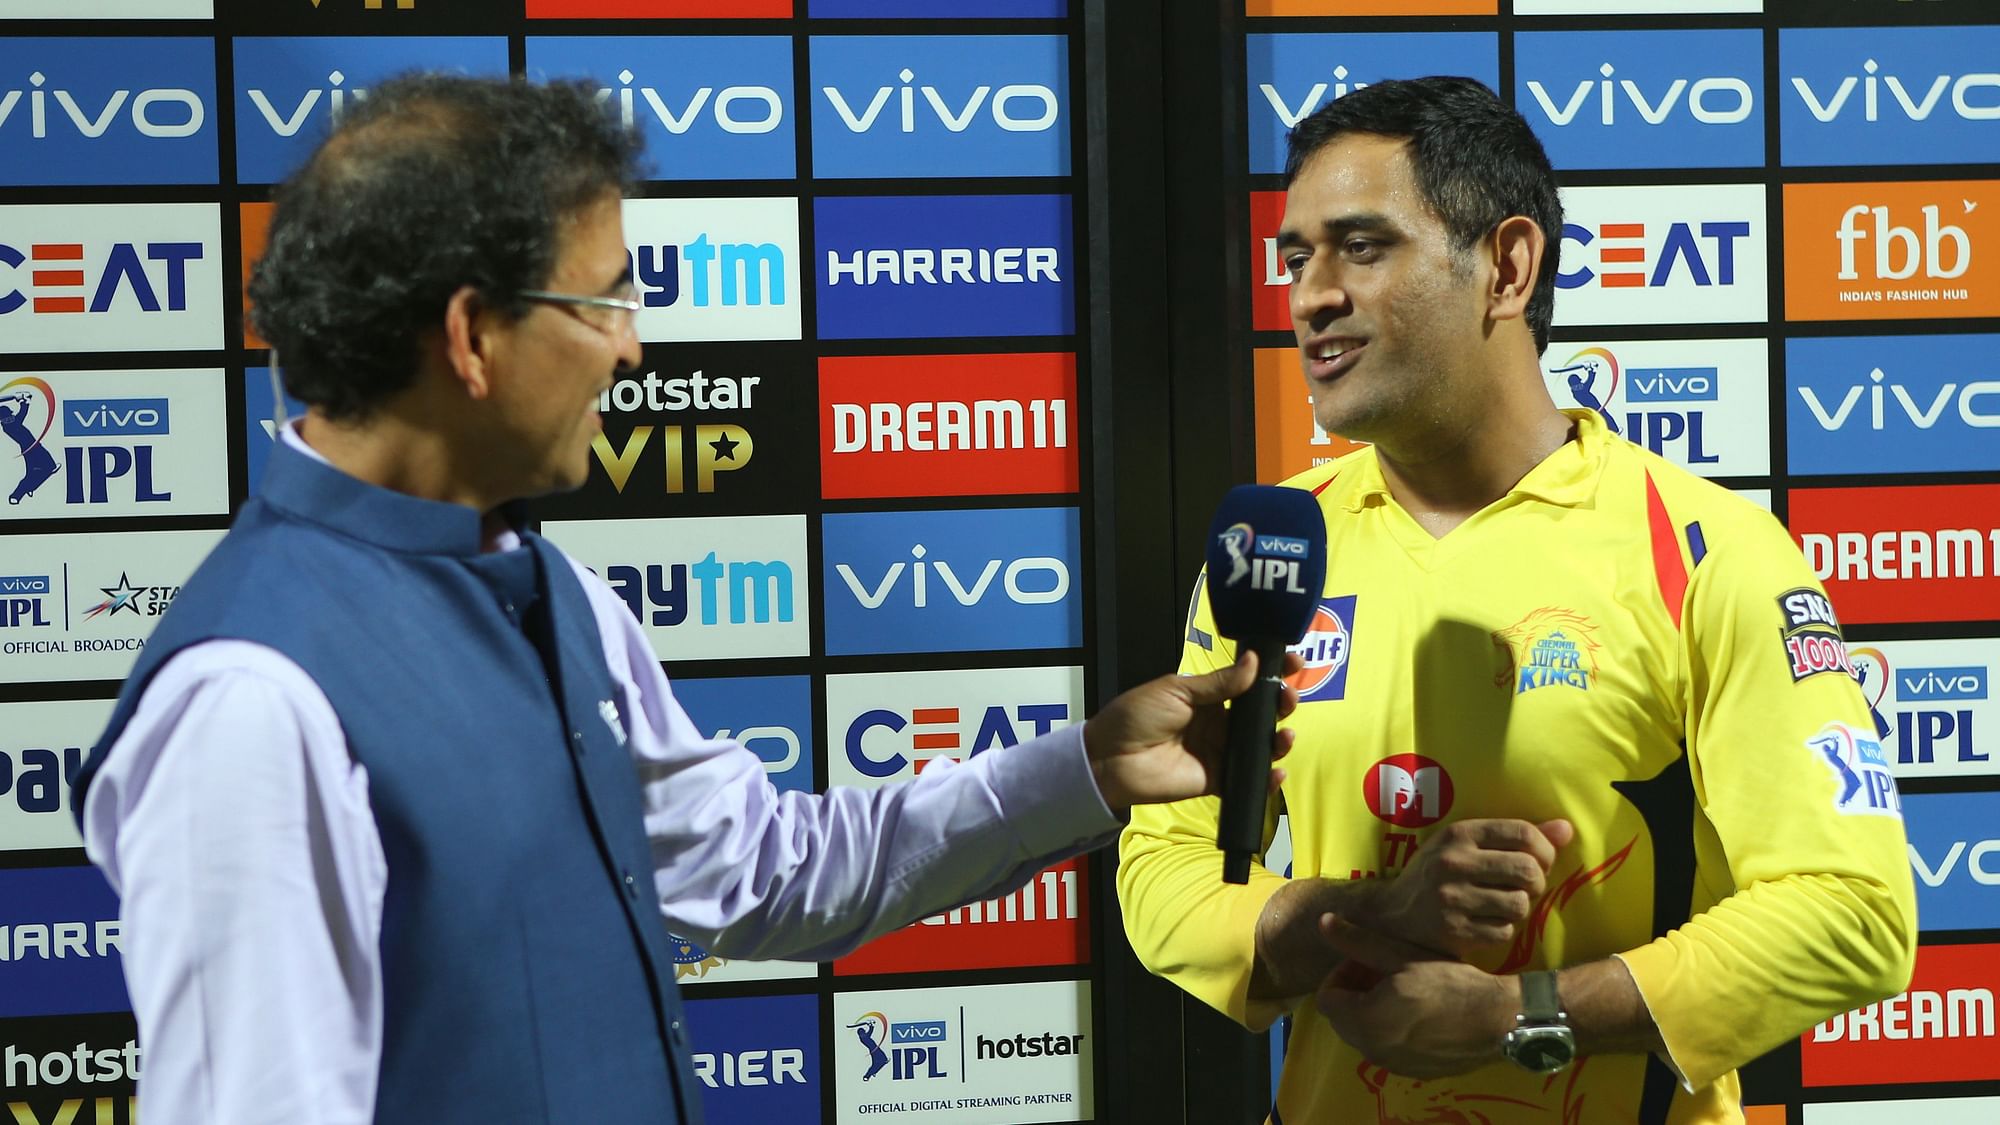 MS Dhoni hinted that his back had been troubling him of late.